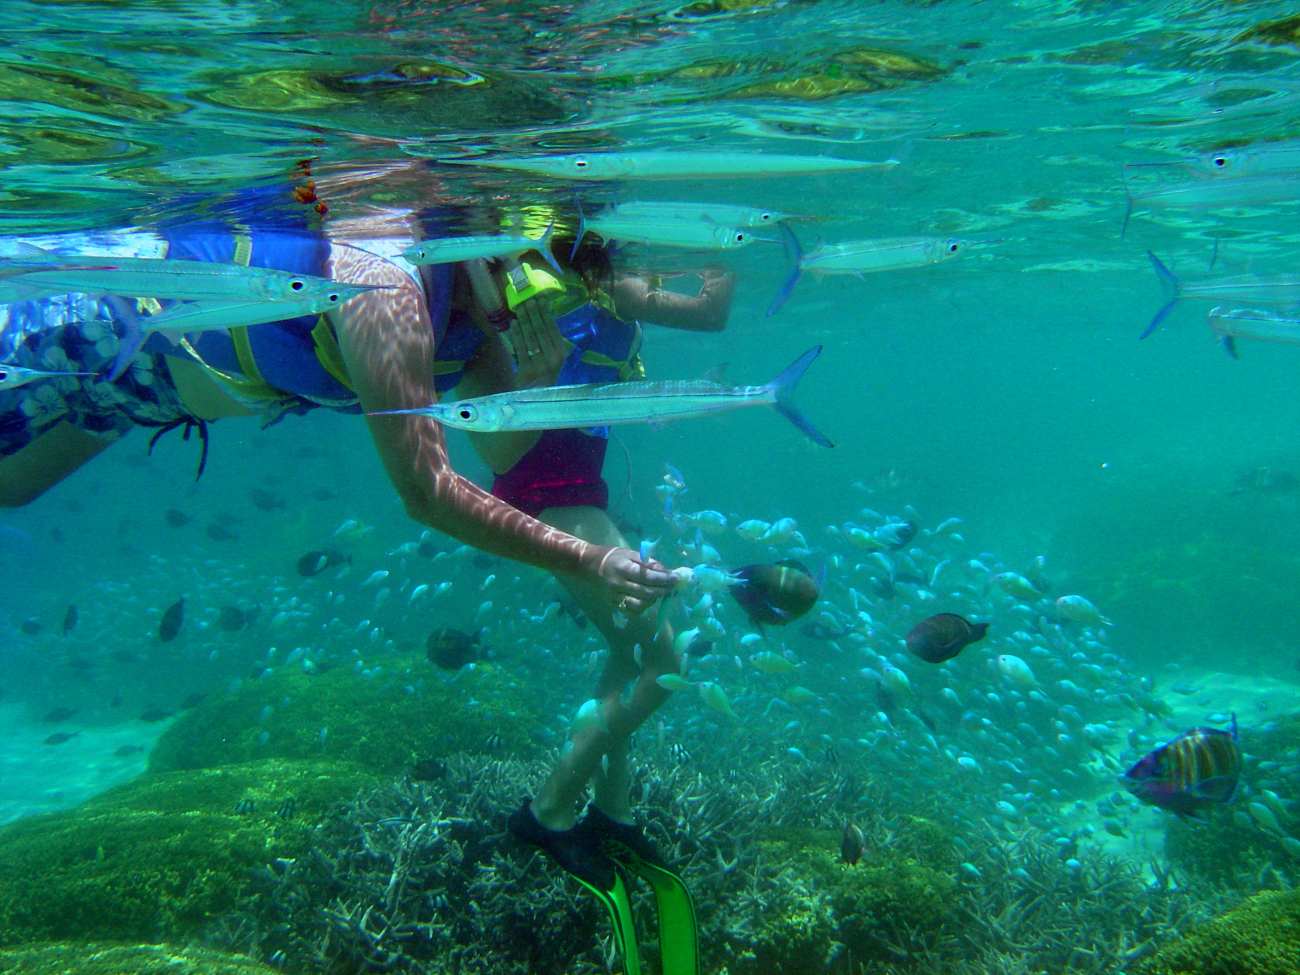 Dive tourism can place additional stress on reefs